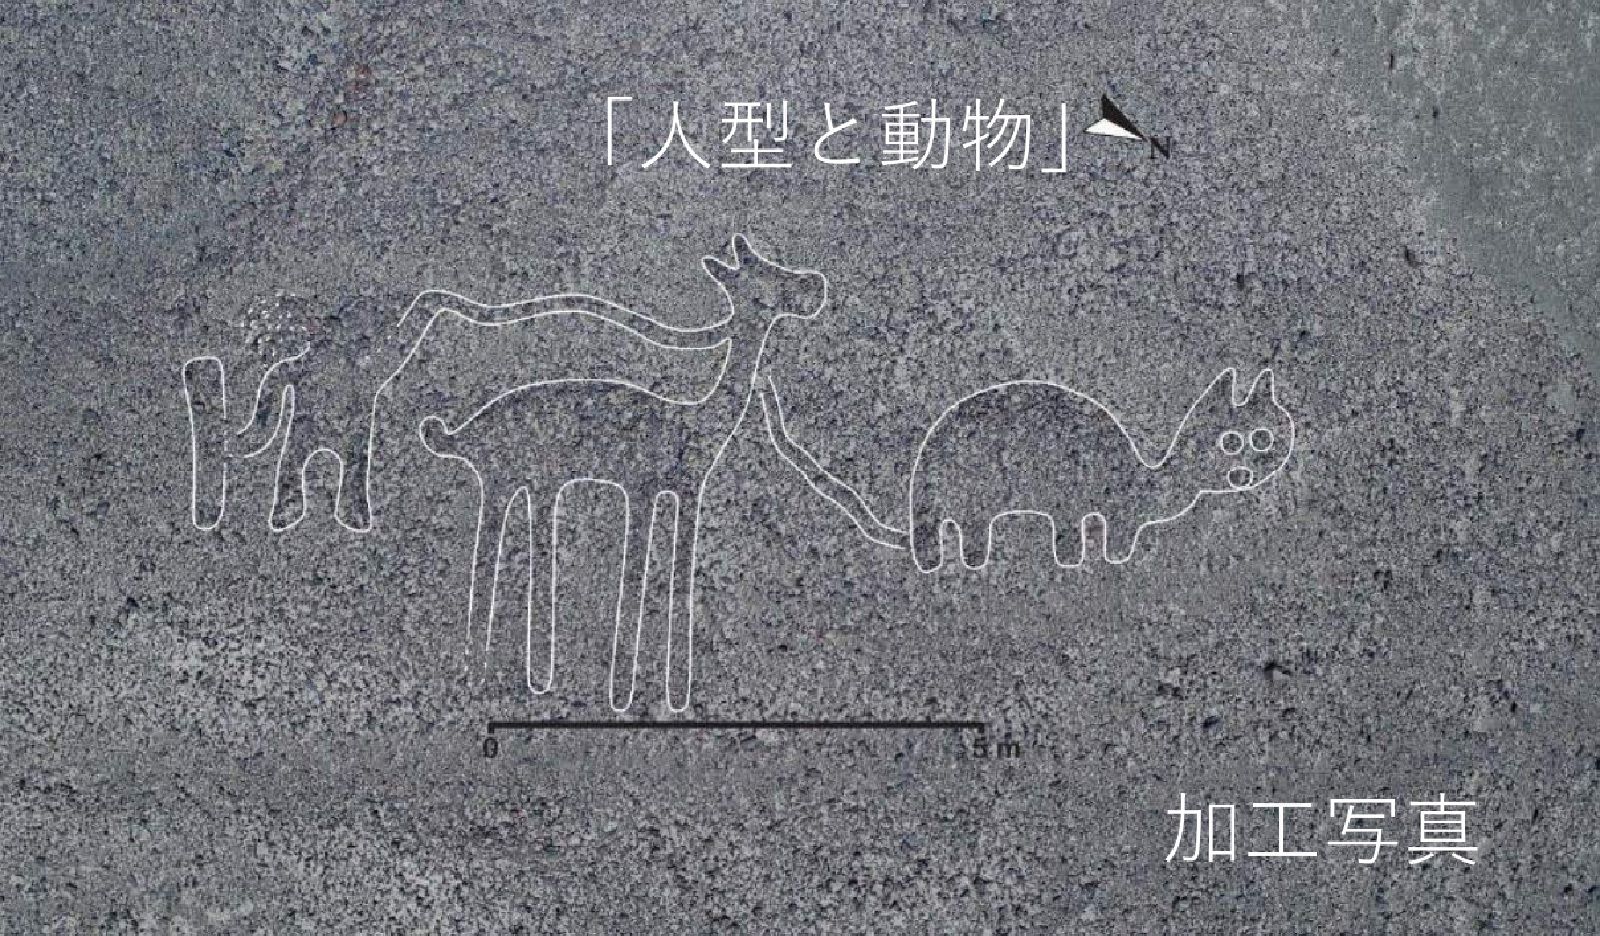 Scientists use IBM AI to discover mysterious drawings in Peru image 11